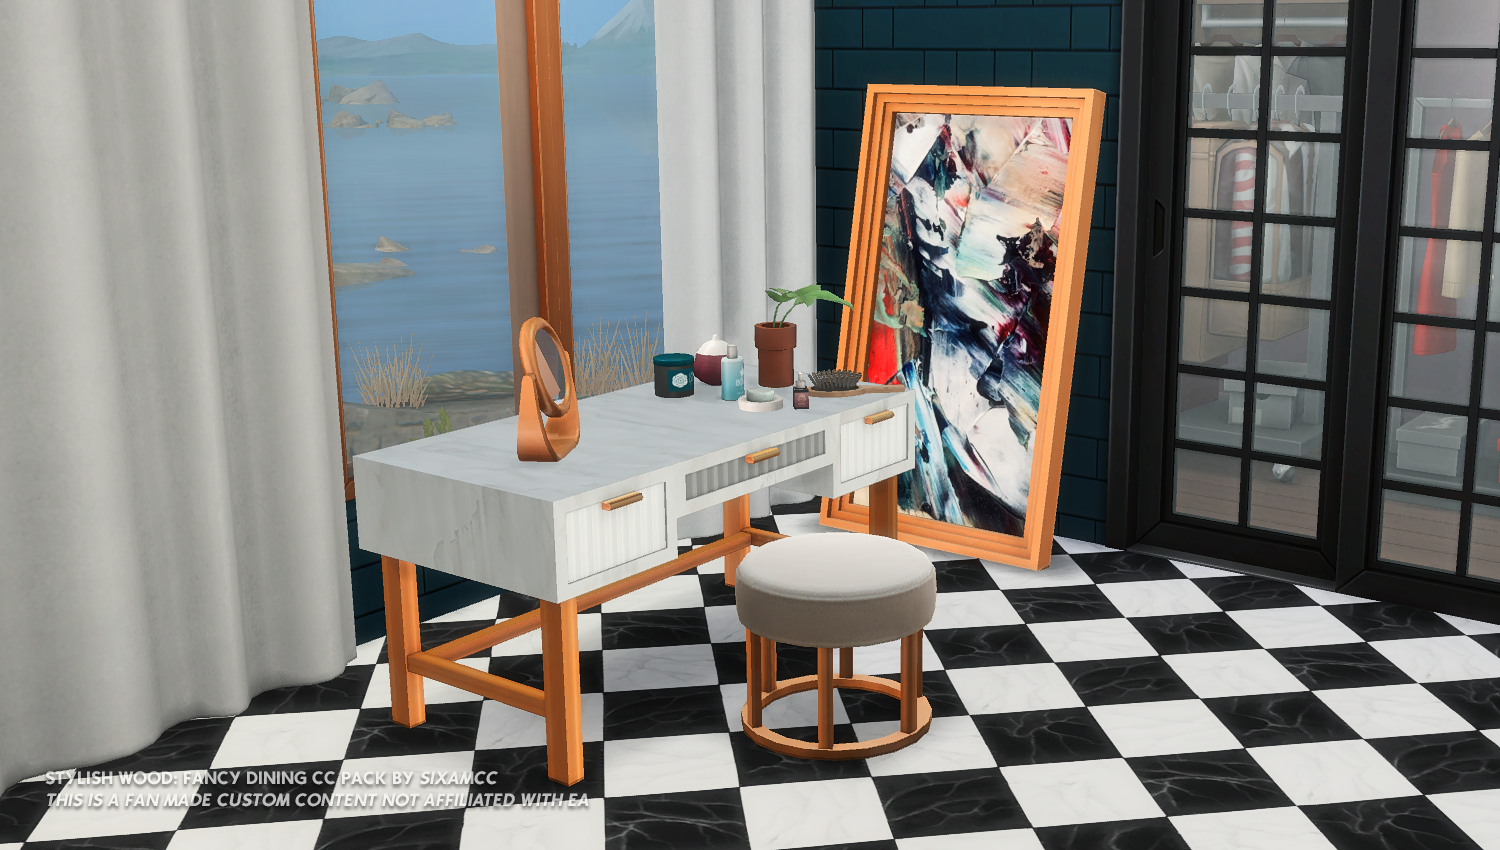 Vanity Nook - 7 items - The Sims 4 Build / Buy - CurseForge